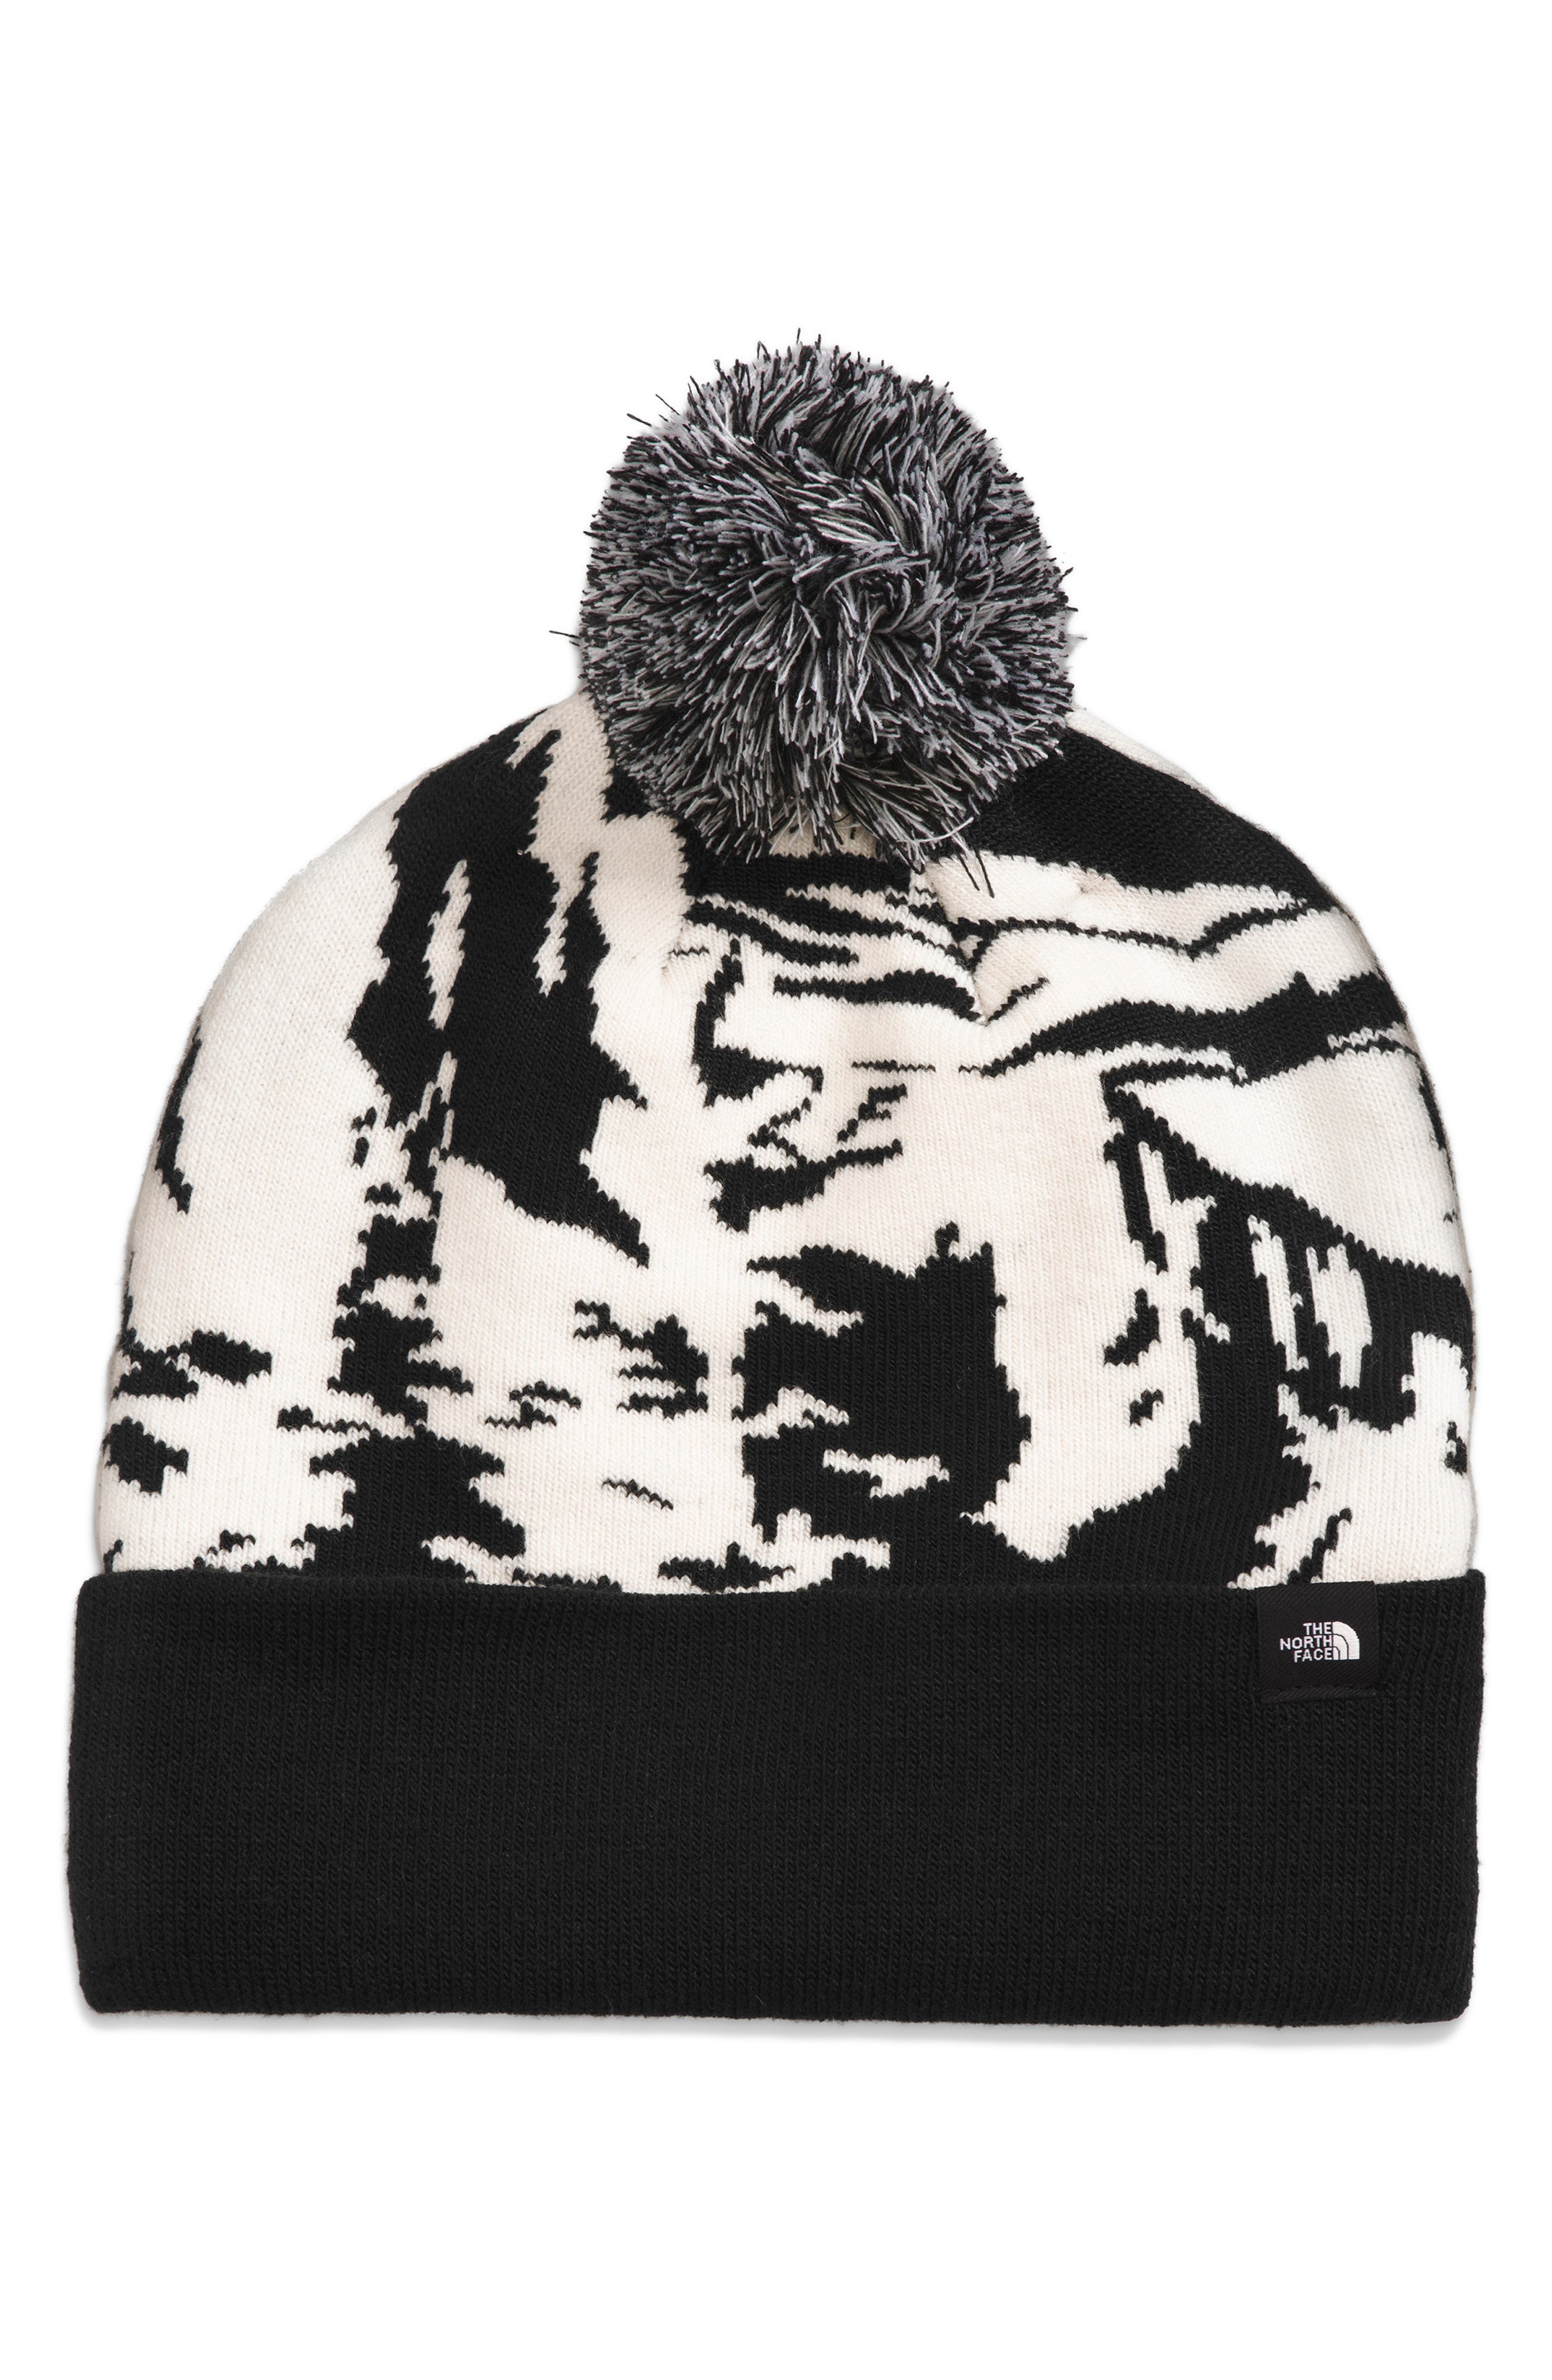 Men's The North Face Hats | Nordstrom